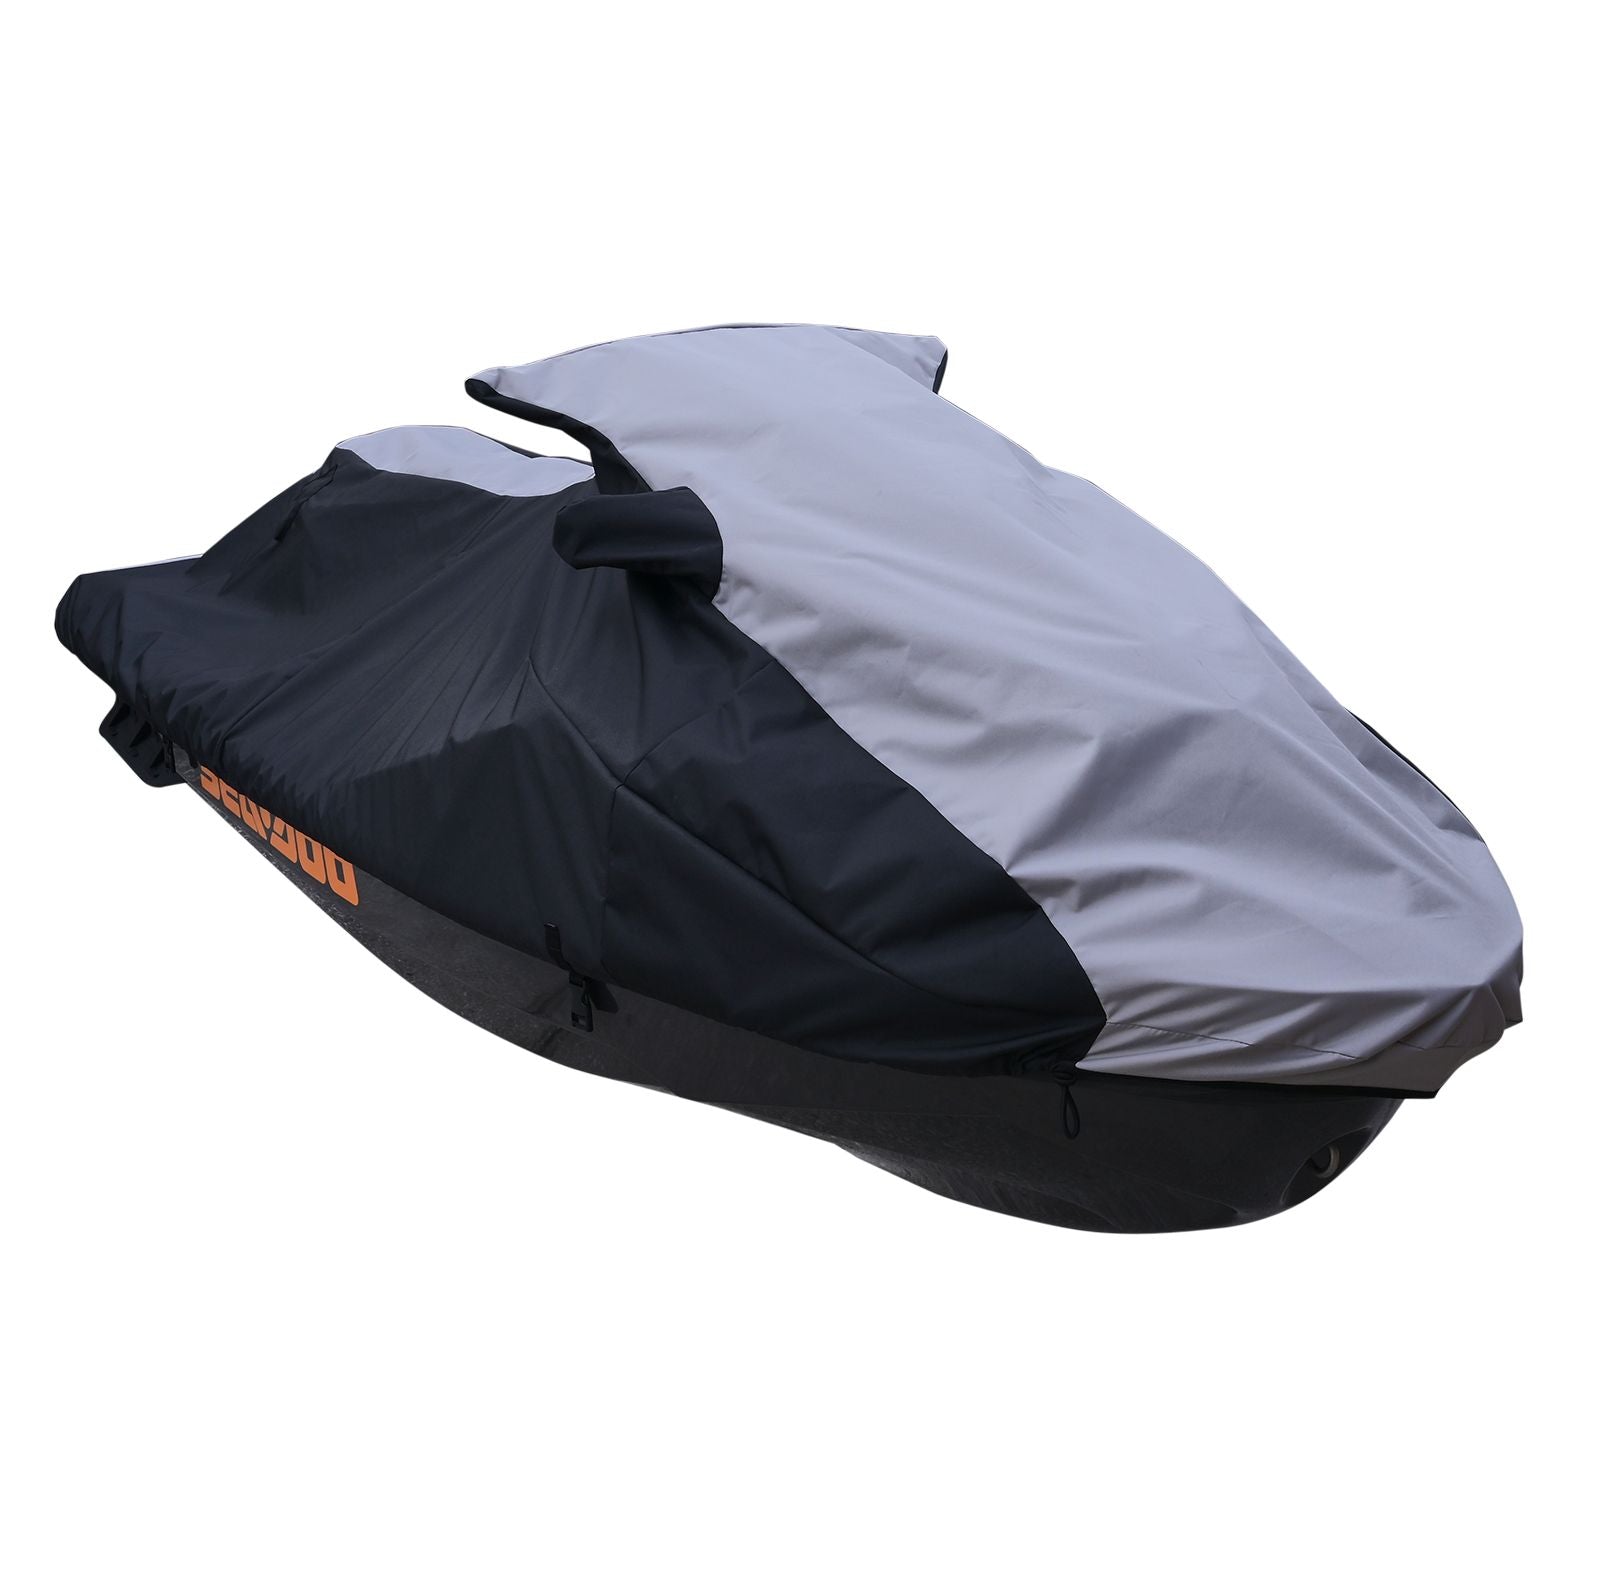 Trailerable Storage cover with vents for Sea-Doo 1993-1995 GTX/ 1990-1991 GT/ 1996-2000 GTS